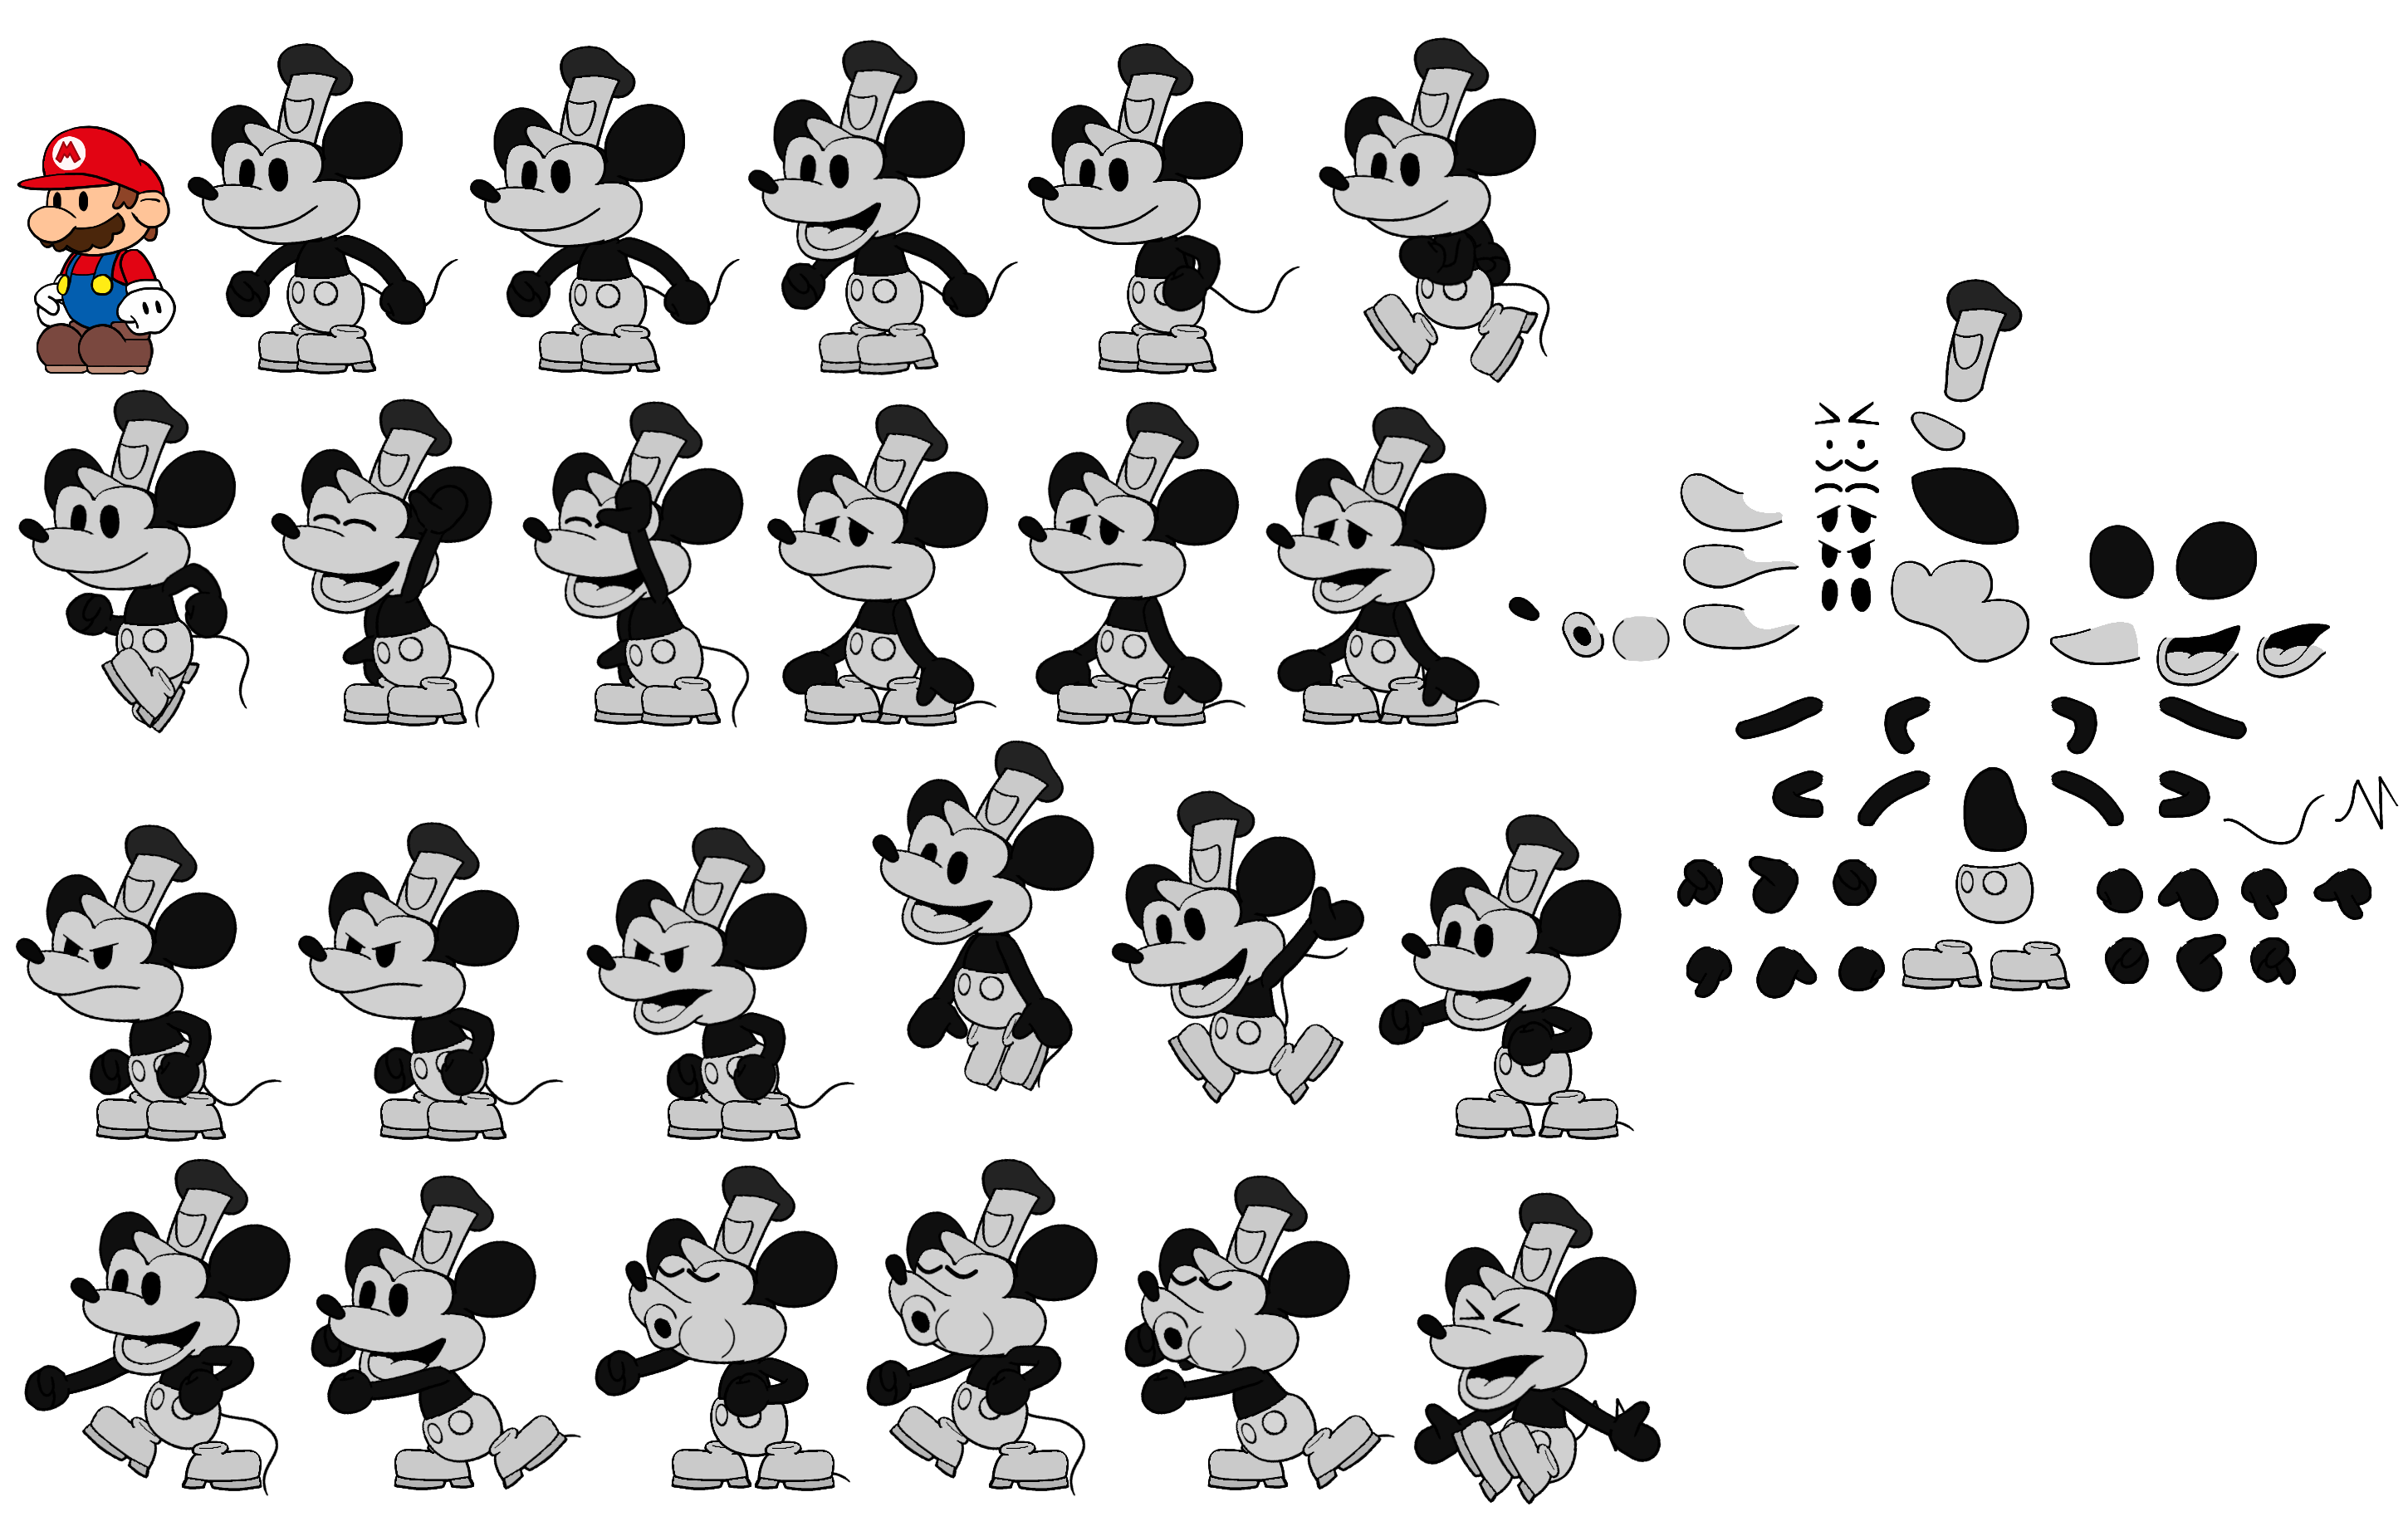 Disney / Pixar Customs - Mickey Mouse (Steamboat Willie, Paper Mario-Style)